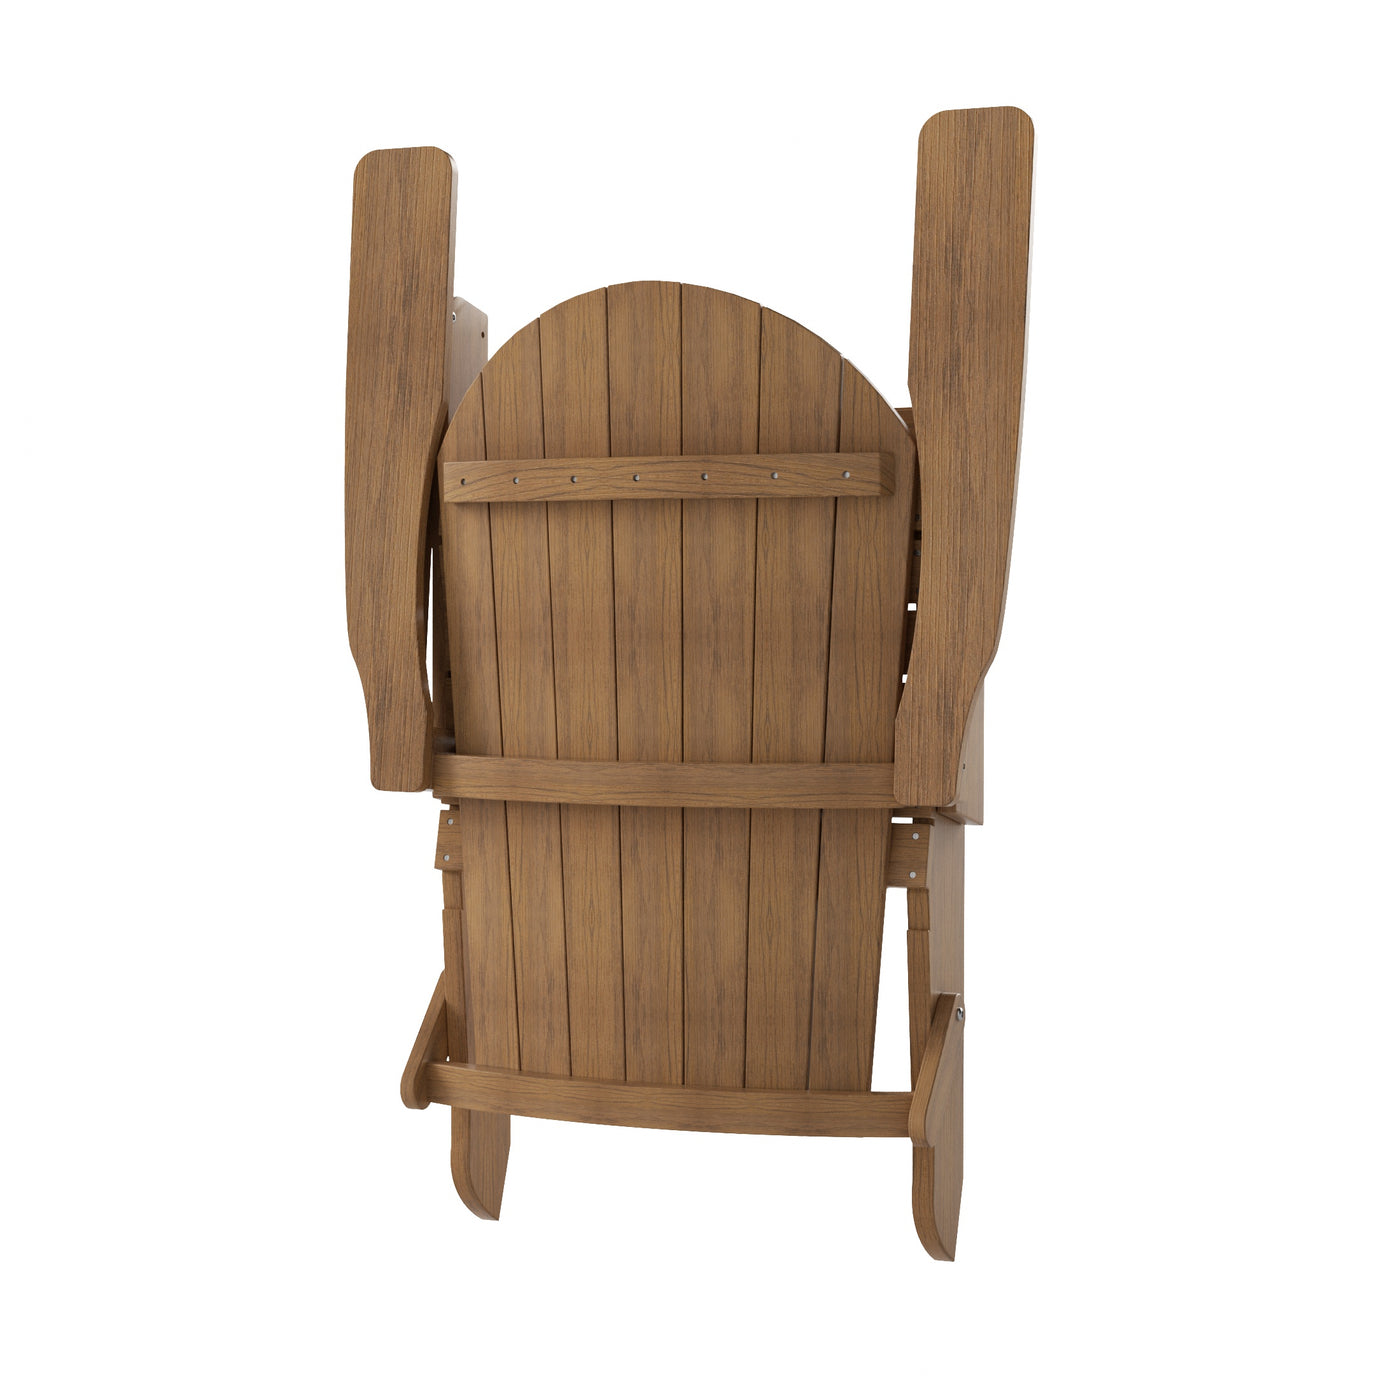 Tuscany HIPS 4-Piece Outdoor Folding Adirondack Chair With Folding Ottoman Set